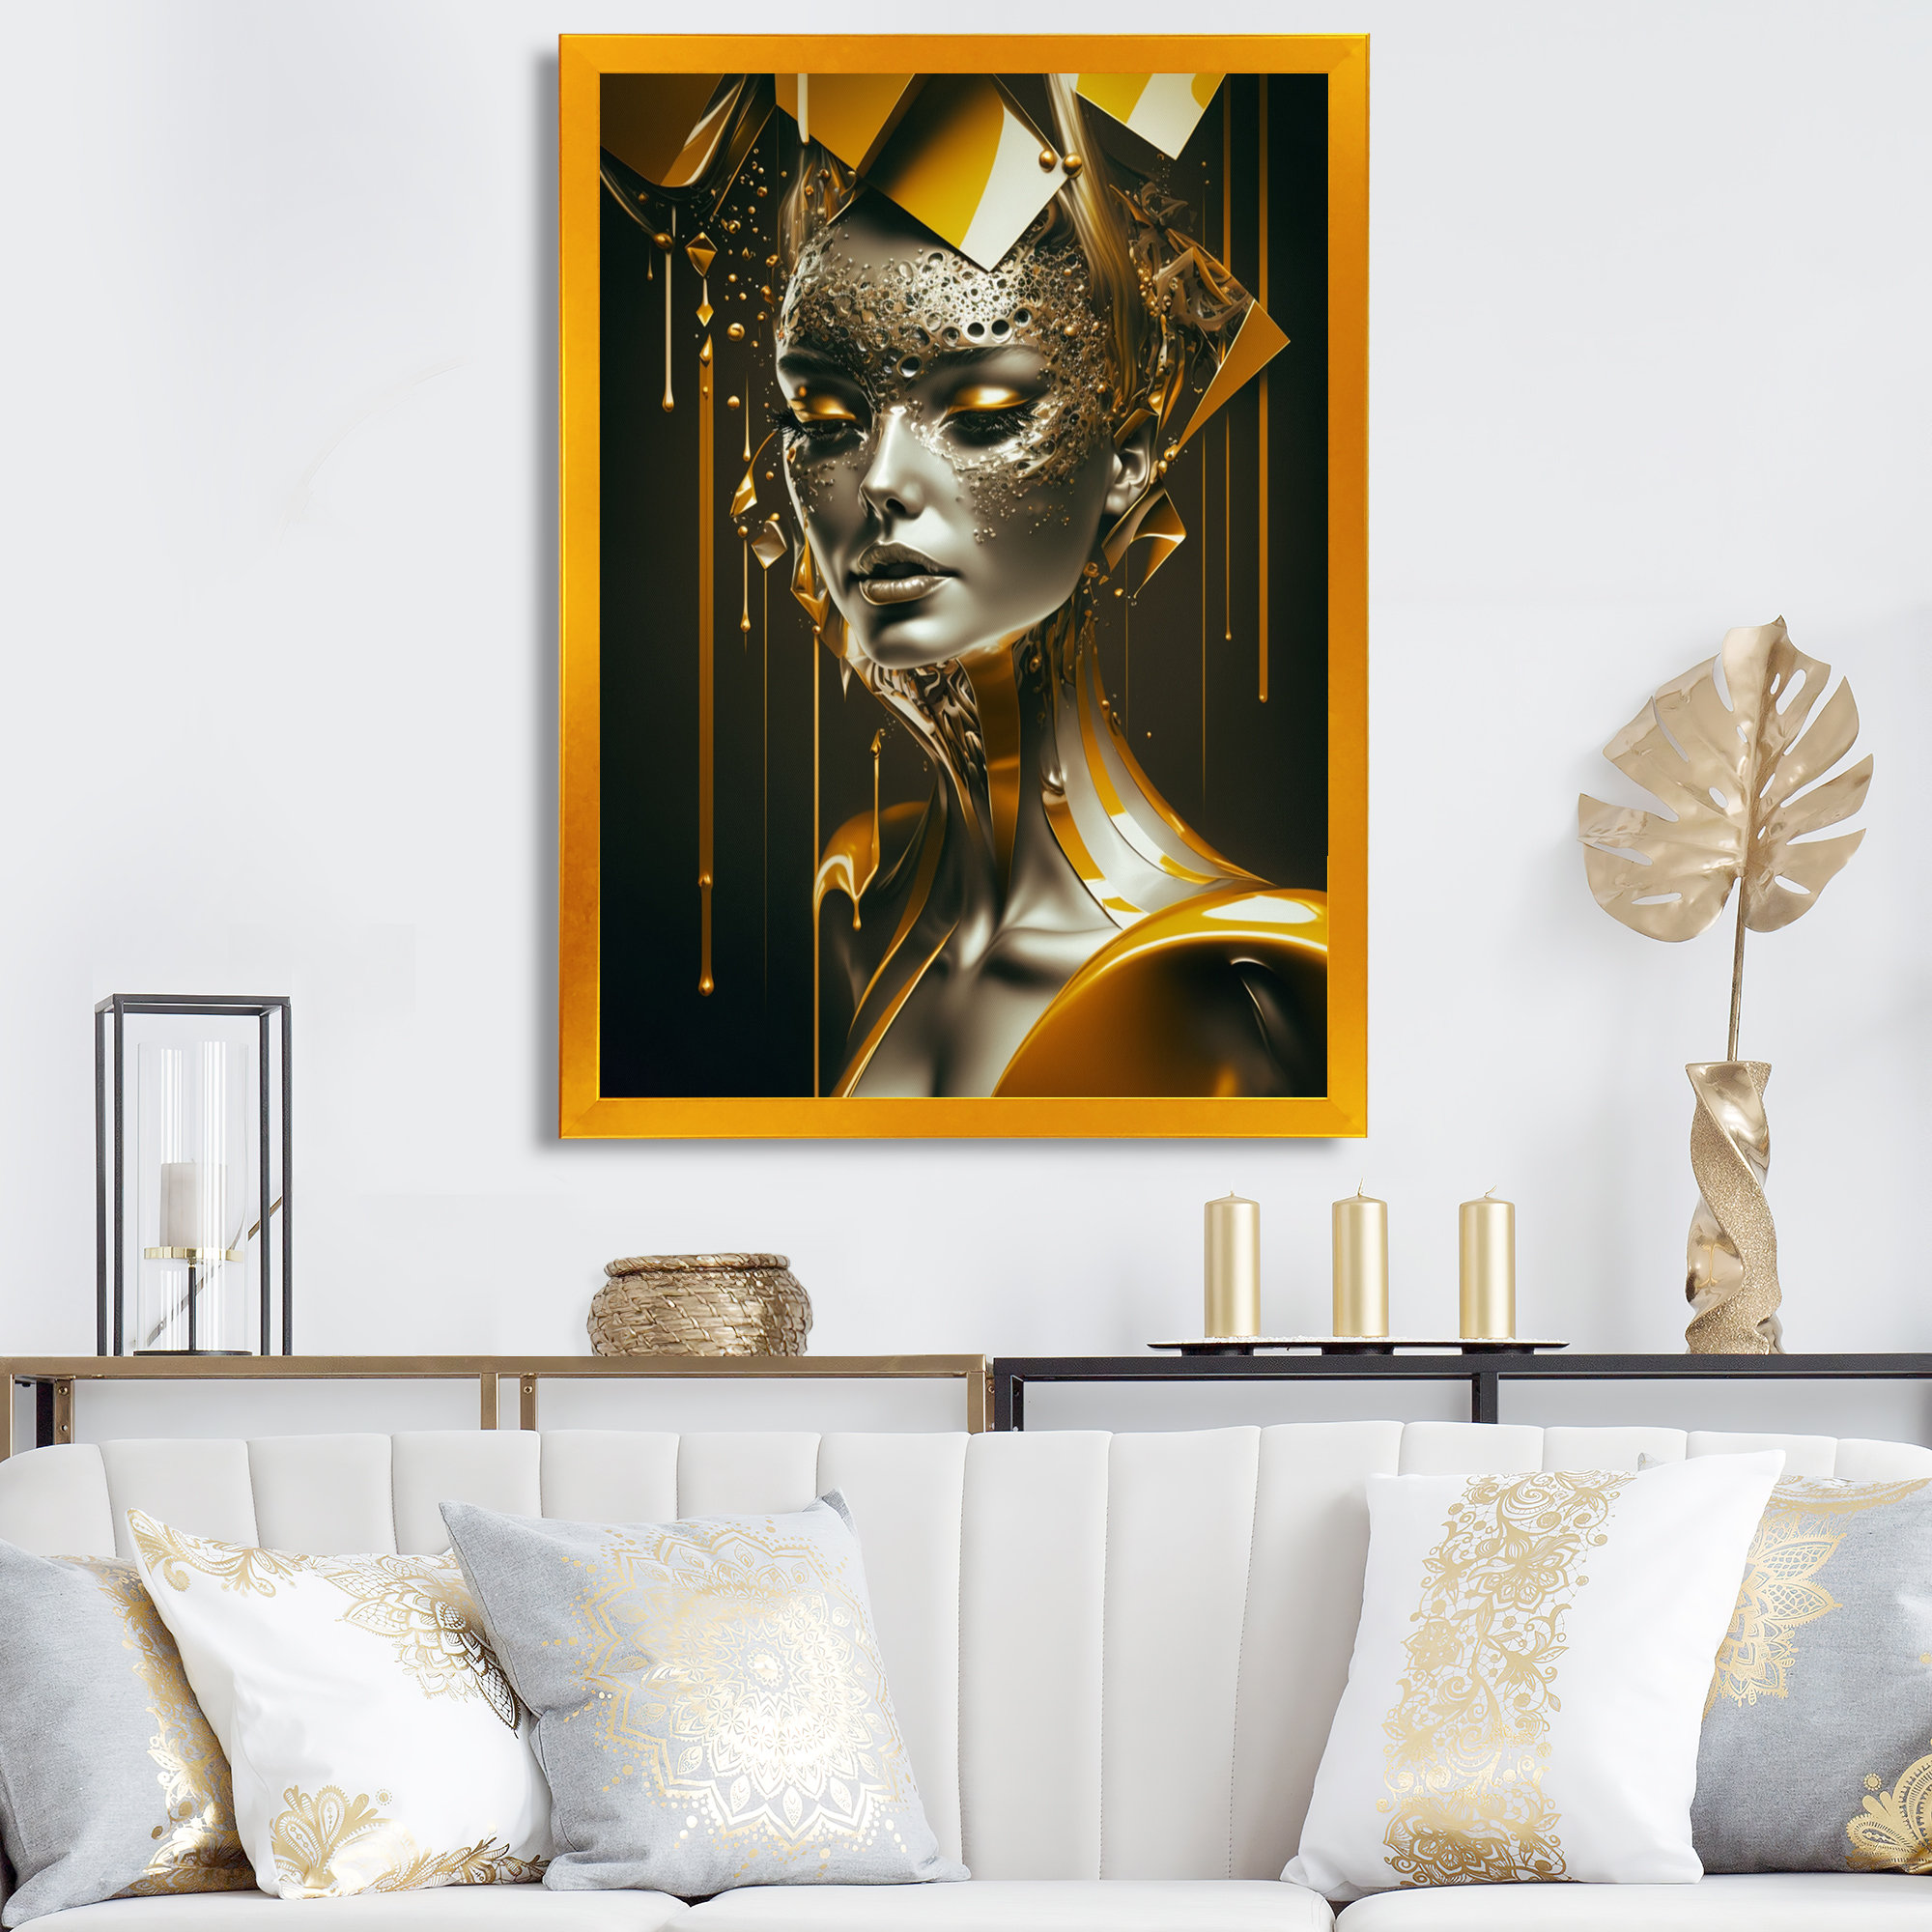 Spin Art III | Large Solid-Faced Canvas Wall Art Print | Great Big Canvas